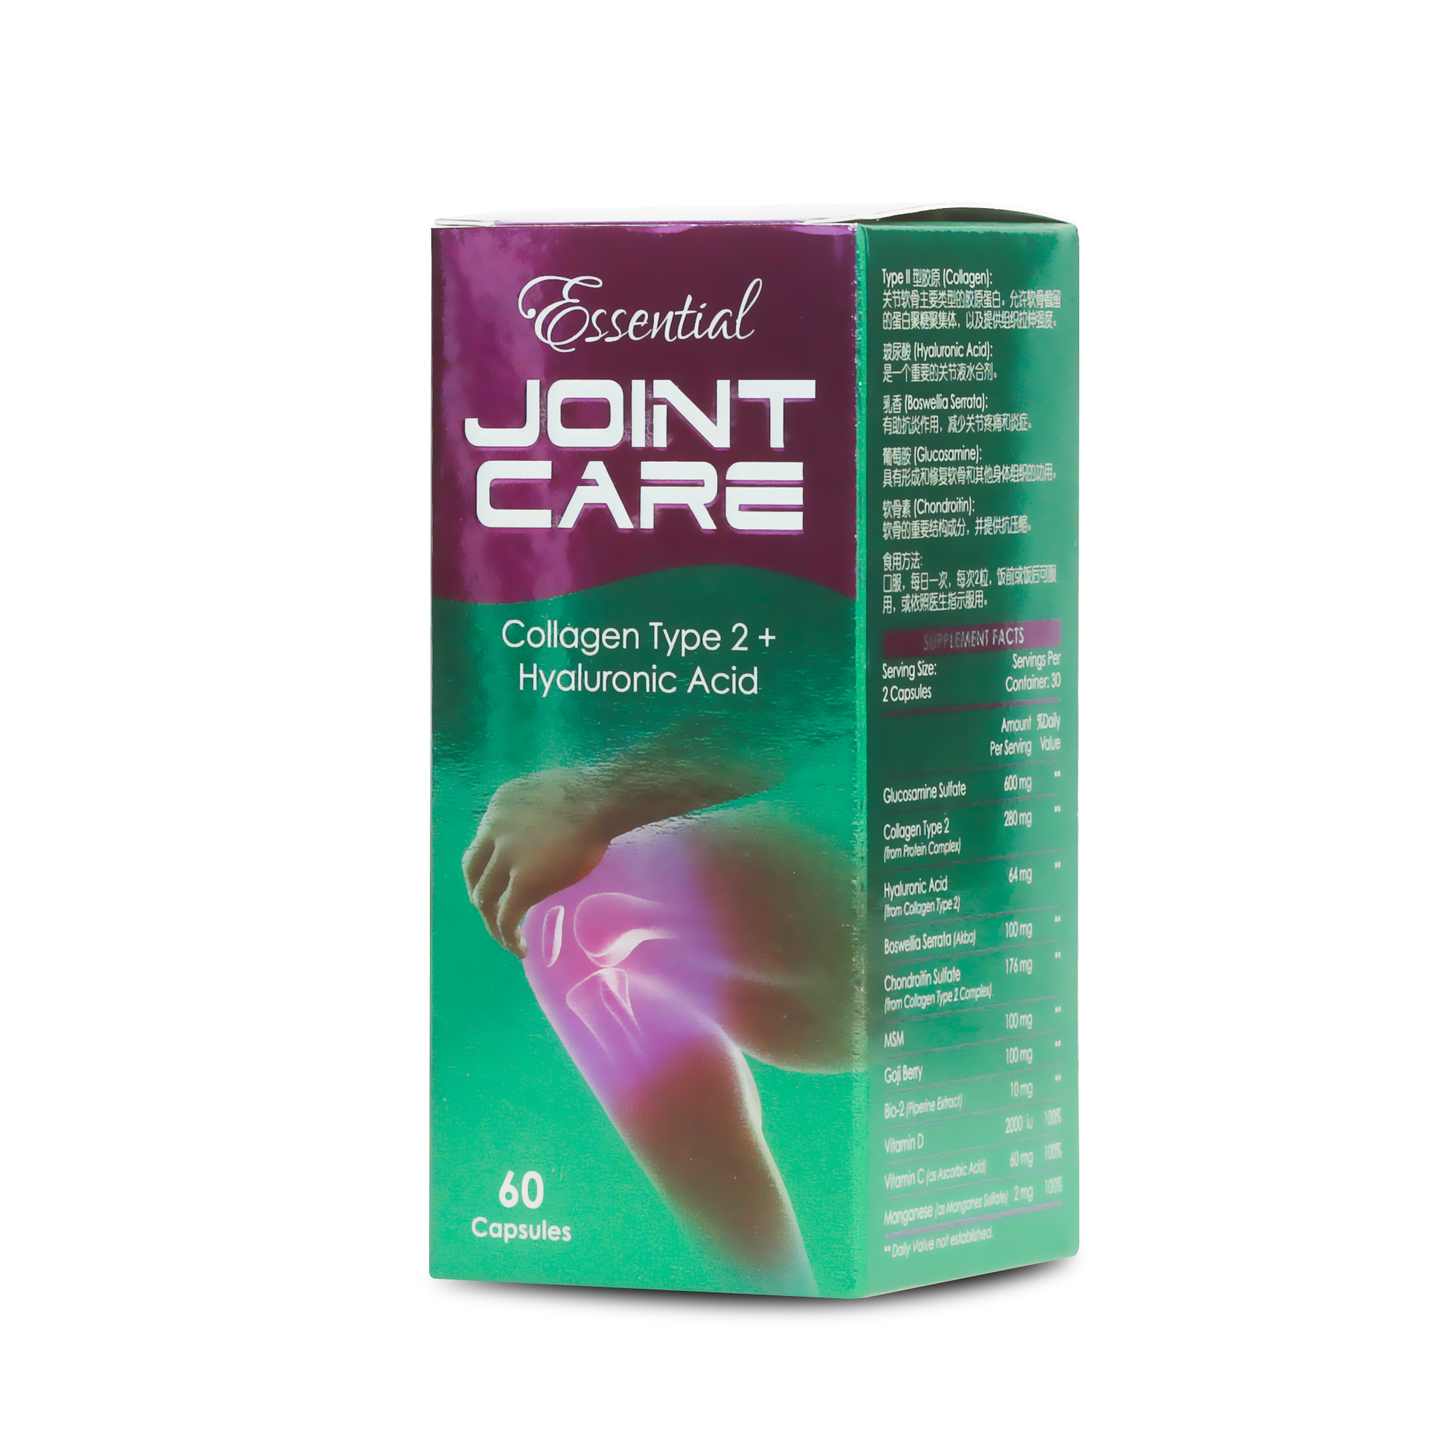 Essential Joint Care